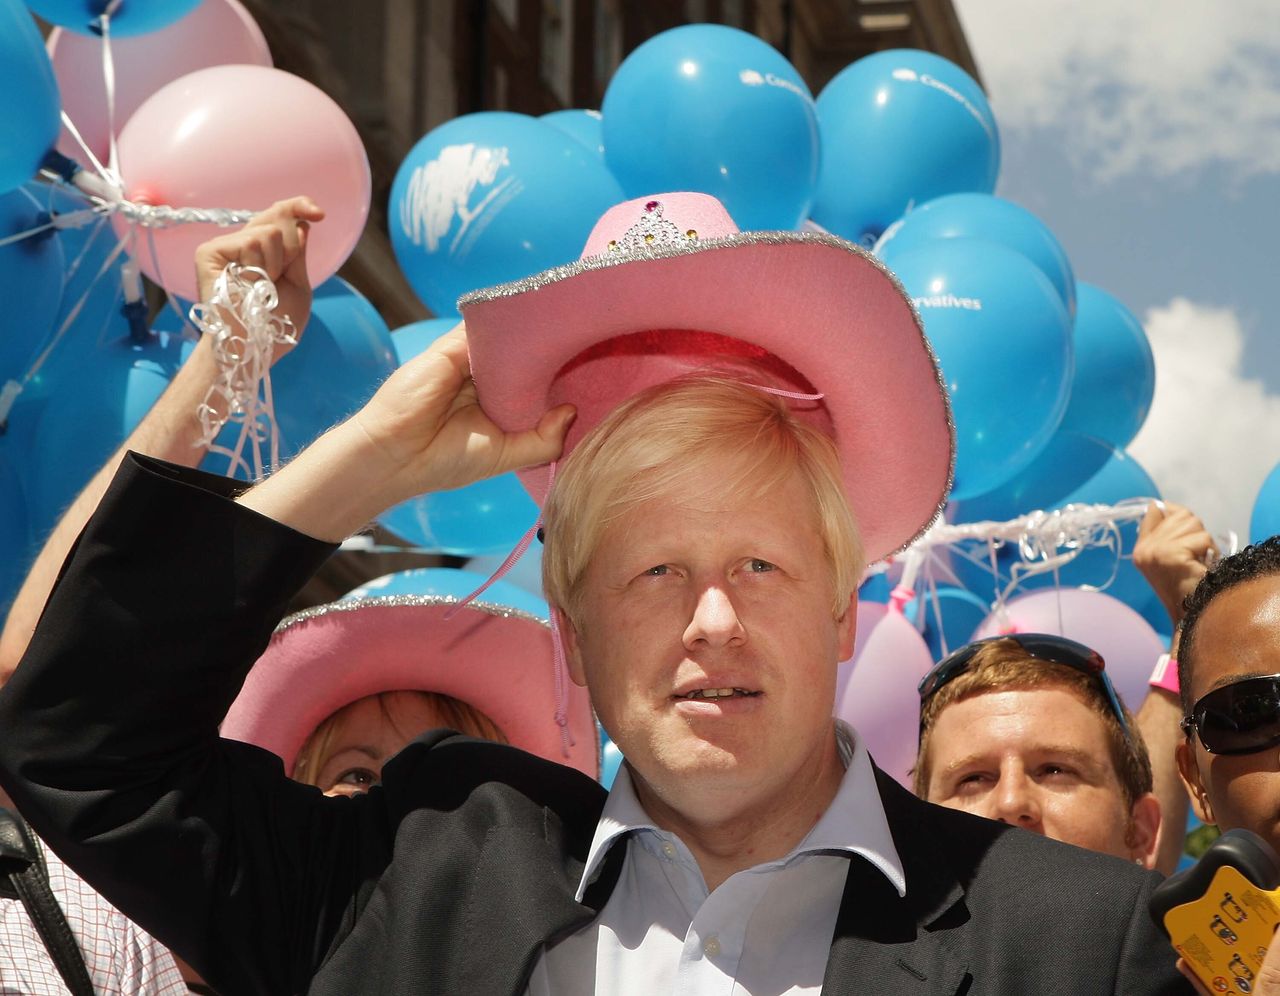 The former London Mayor Boris Johnson wears a pink stetson hat at the Gay Pride parade in 2008.